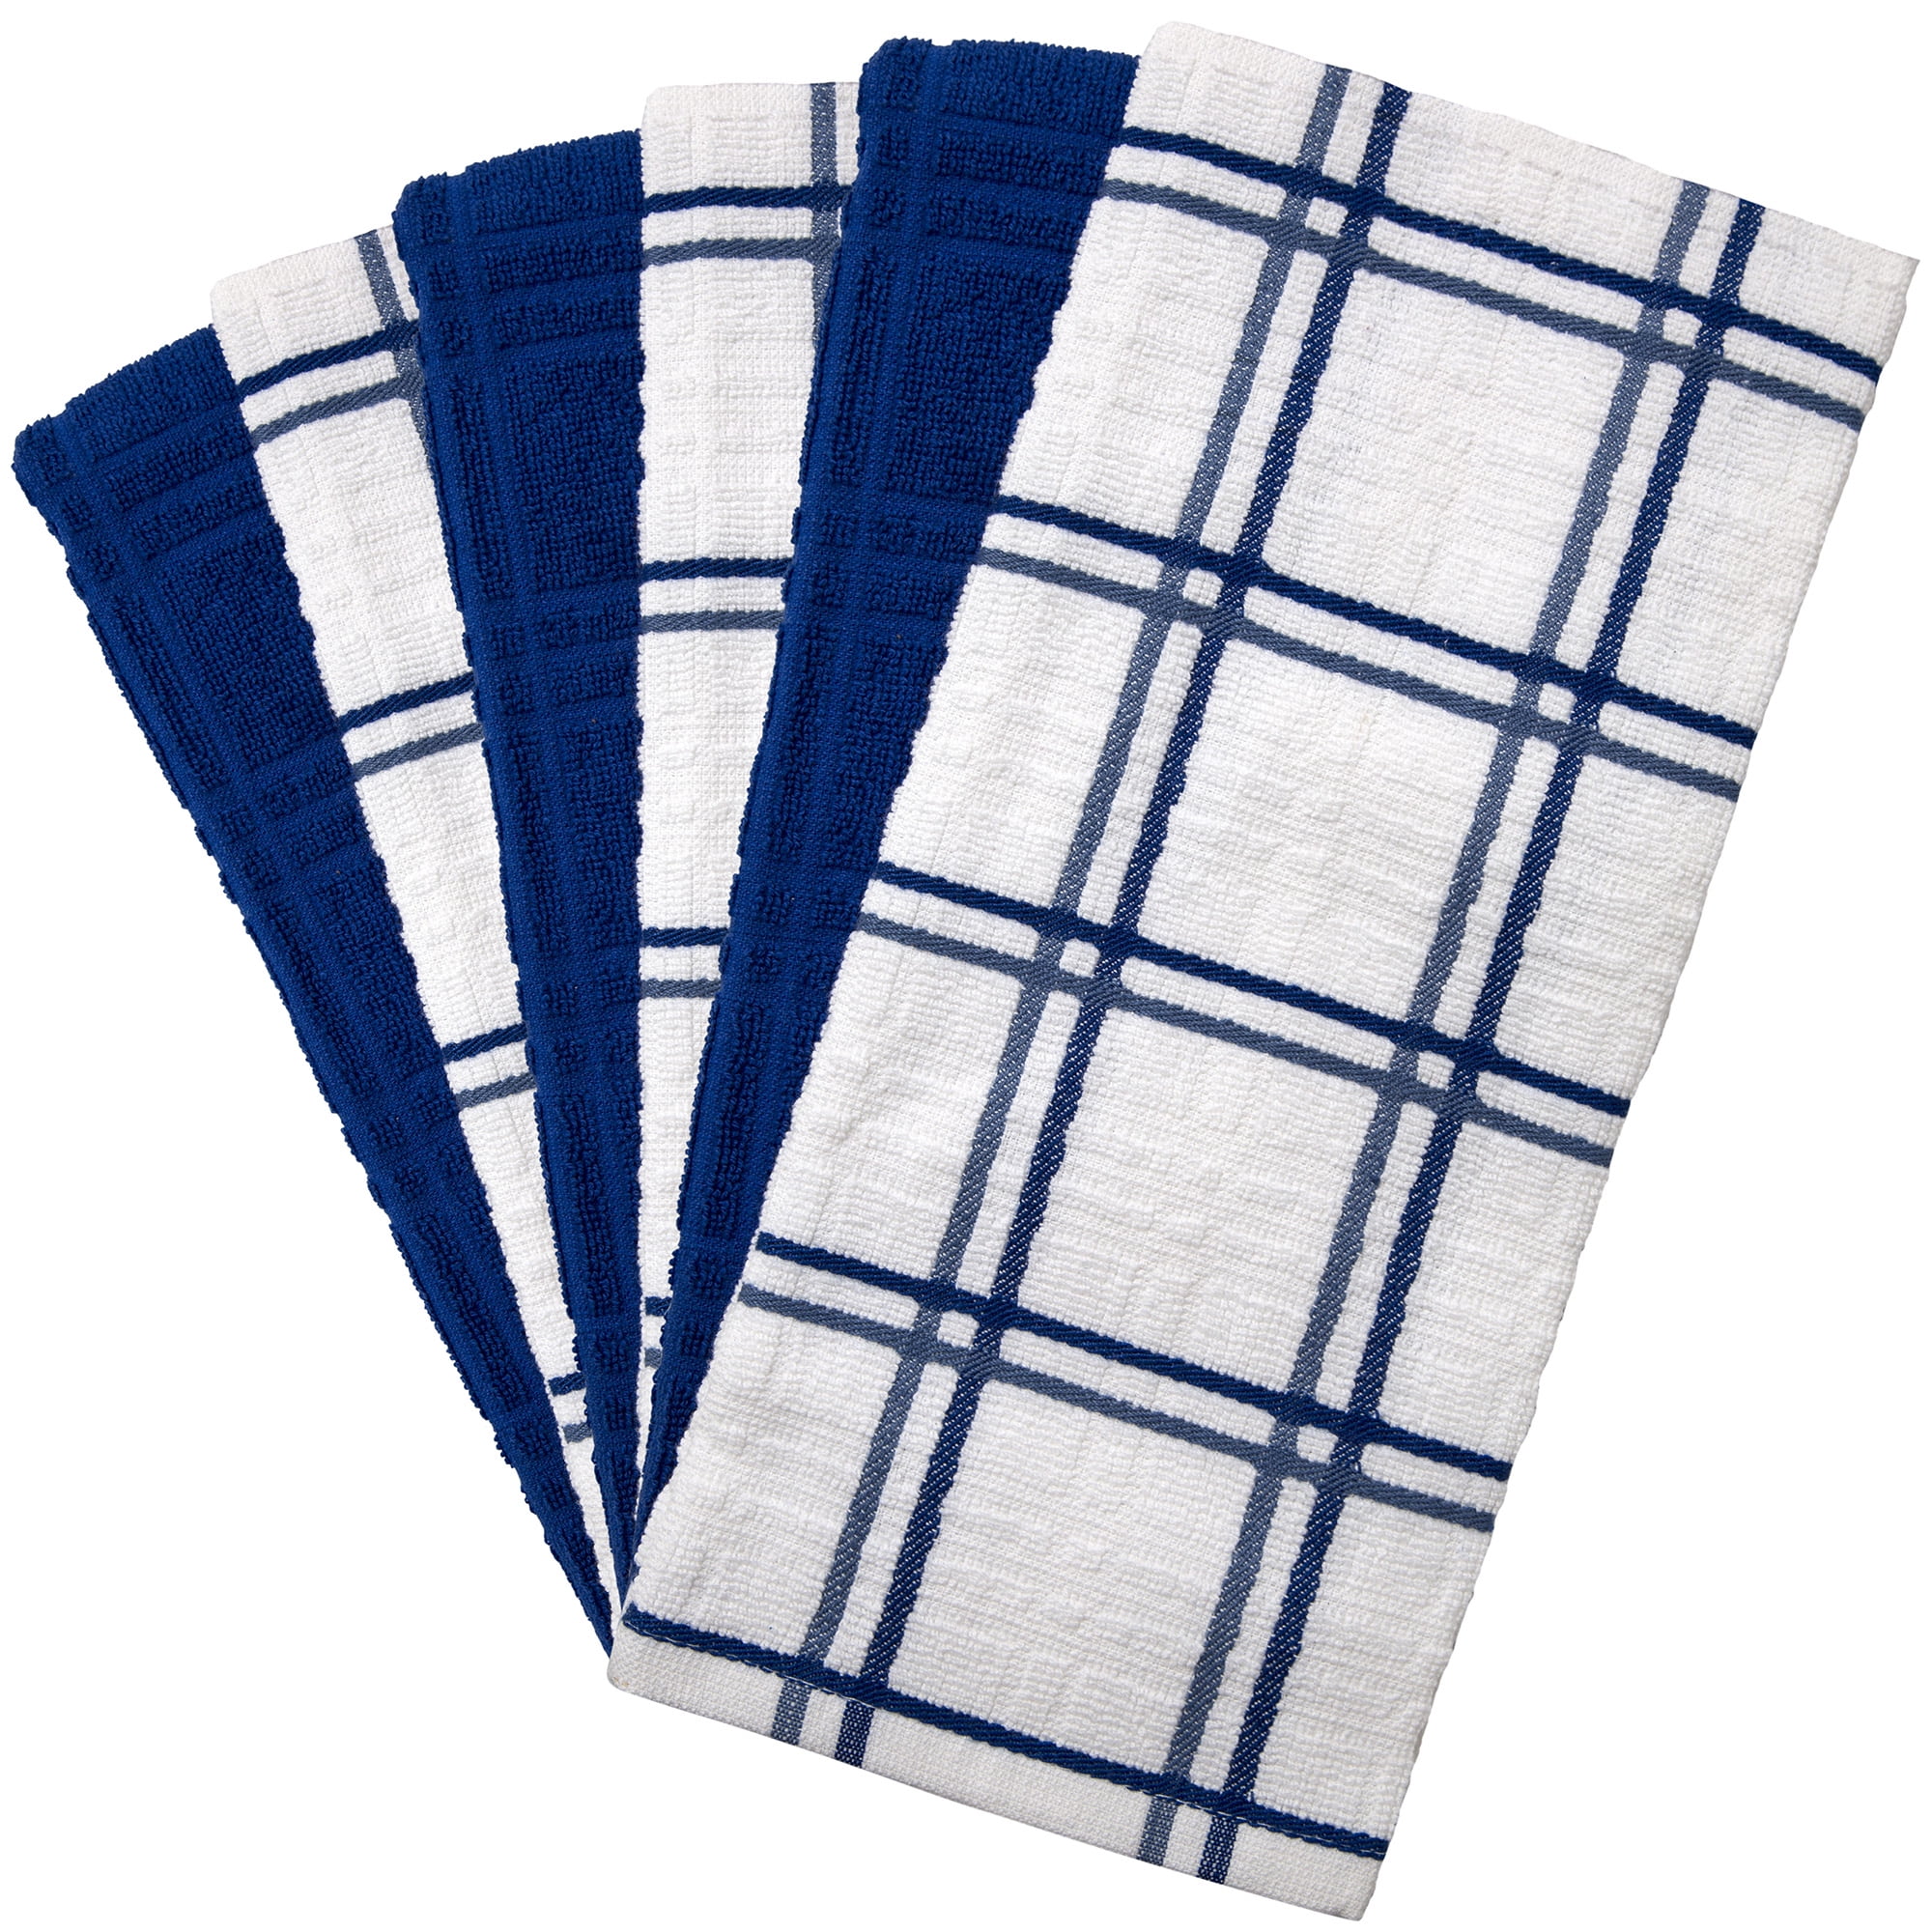 Premium Kitchen Towels (16x 25, 6 Pack) Large Cotton Kitchen Hand Towels Diagonal Weave Design 445 GSM Highly Absorbent Tea Towels Set with Hanging